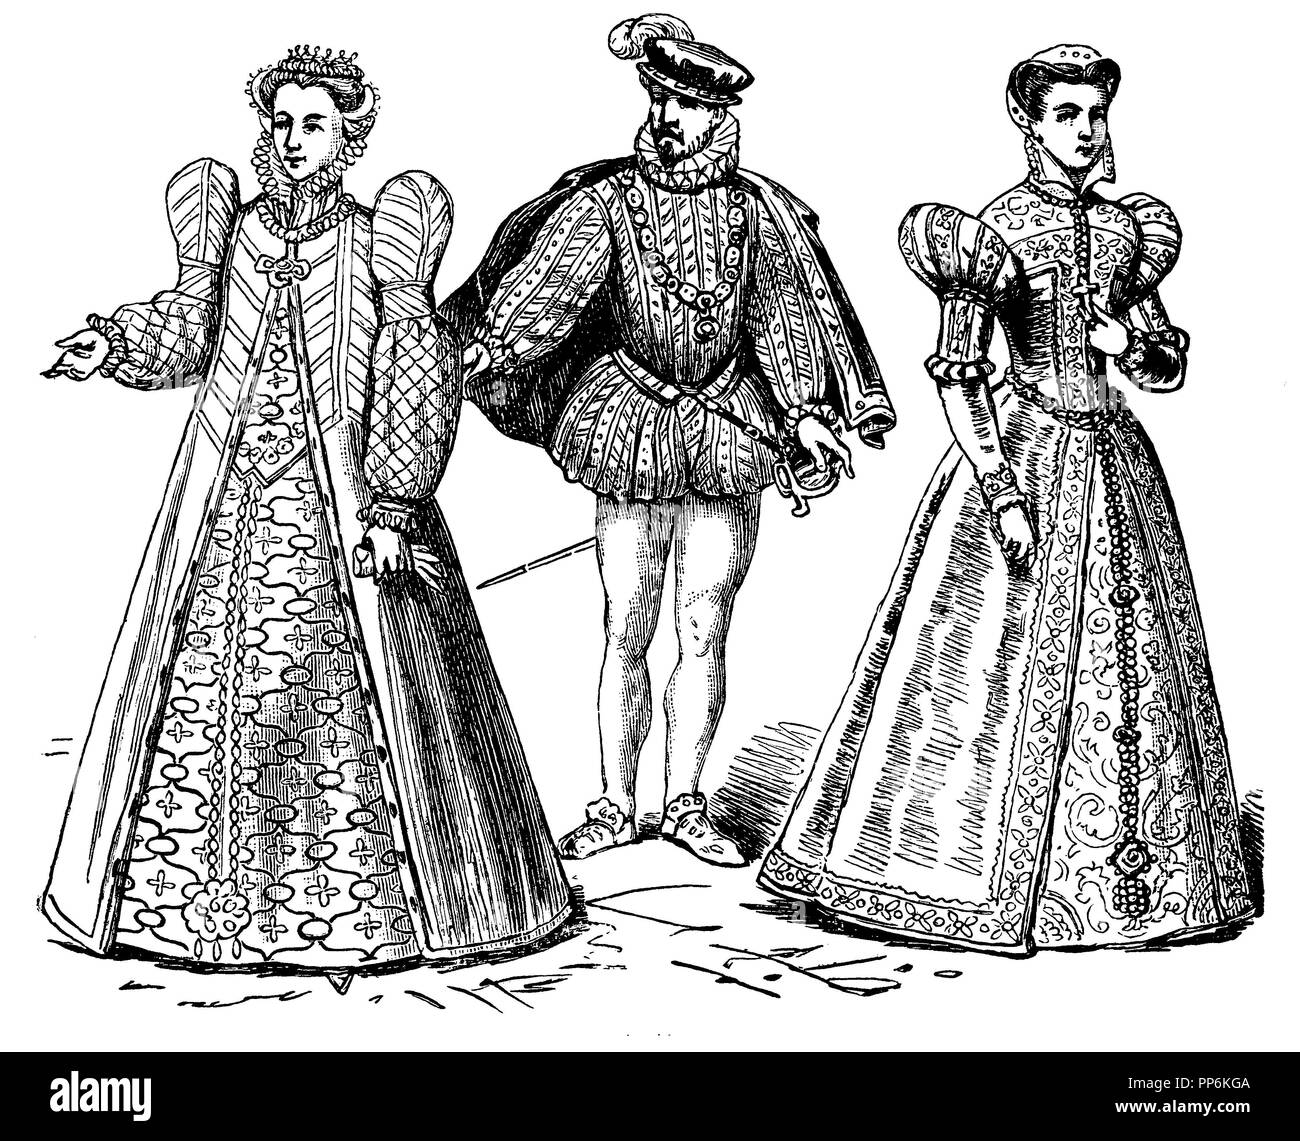 Spanish Costume (1550-1600), France, left: Catherine de Medici, b. 1519, died 1589, middle: Charles IX. (1560-1574), right: Mary Stuart, Queen of France 1559/60, anonym  1896 Stock Photo